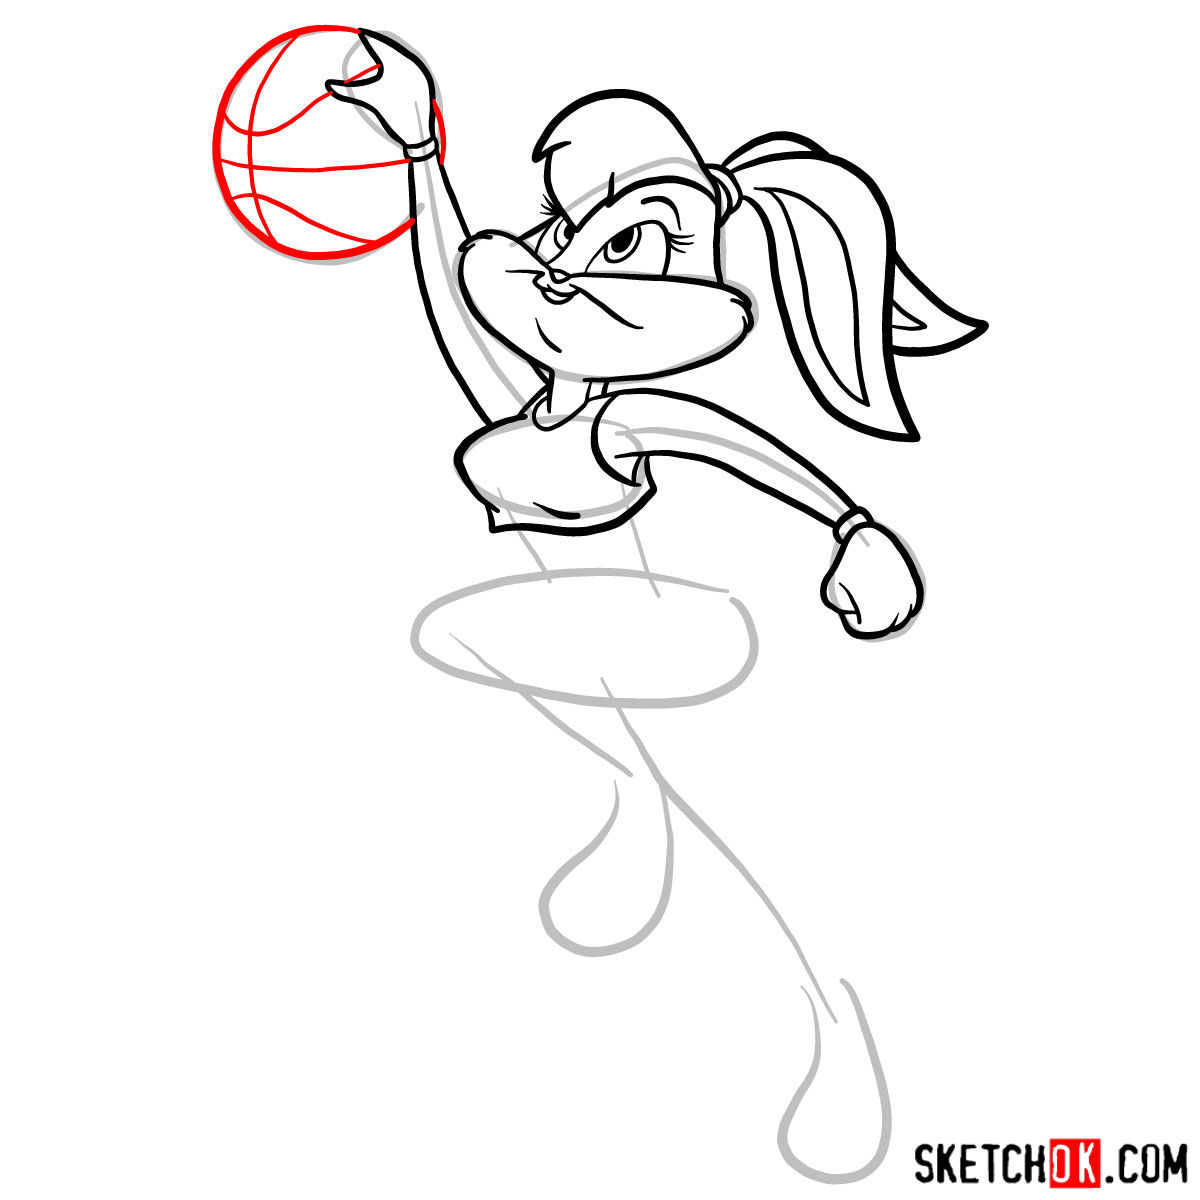 How To Draw Lola Bunny Playing Basketball Step By Step.